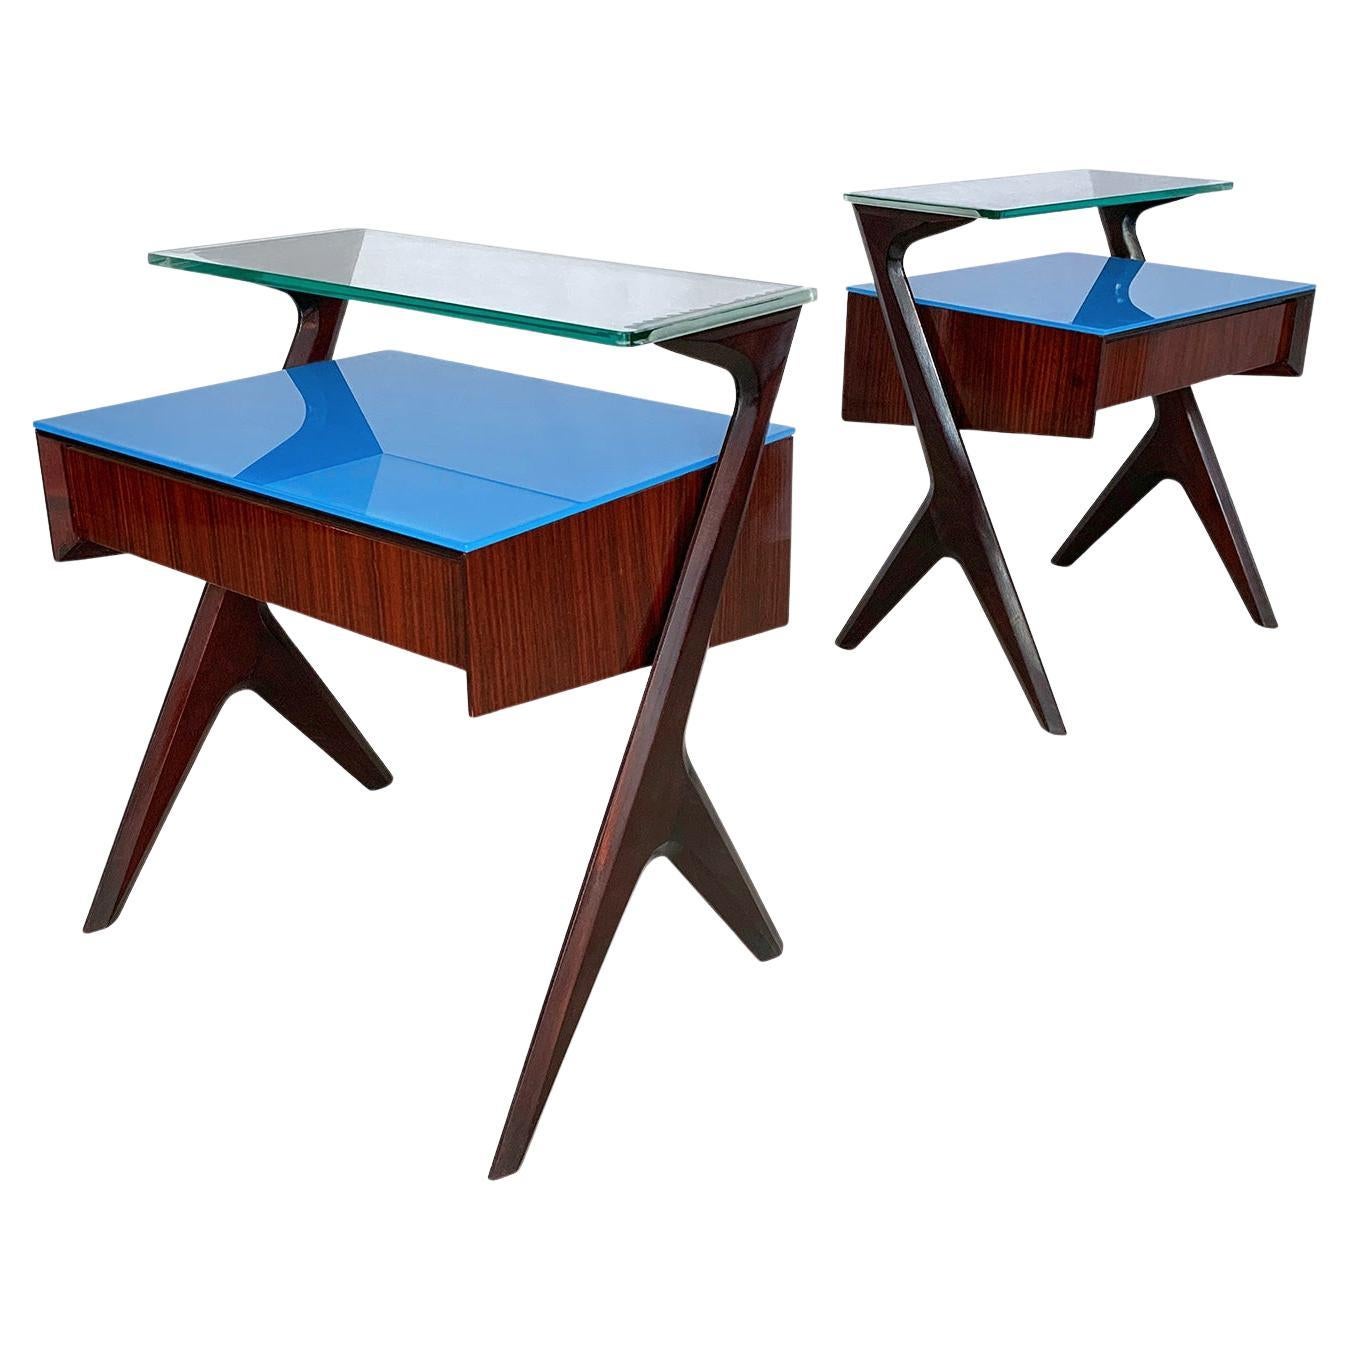 Pair of Italian Midcentury Bedside Tables or Nightstand by Vittorio Dassi, 1950s